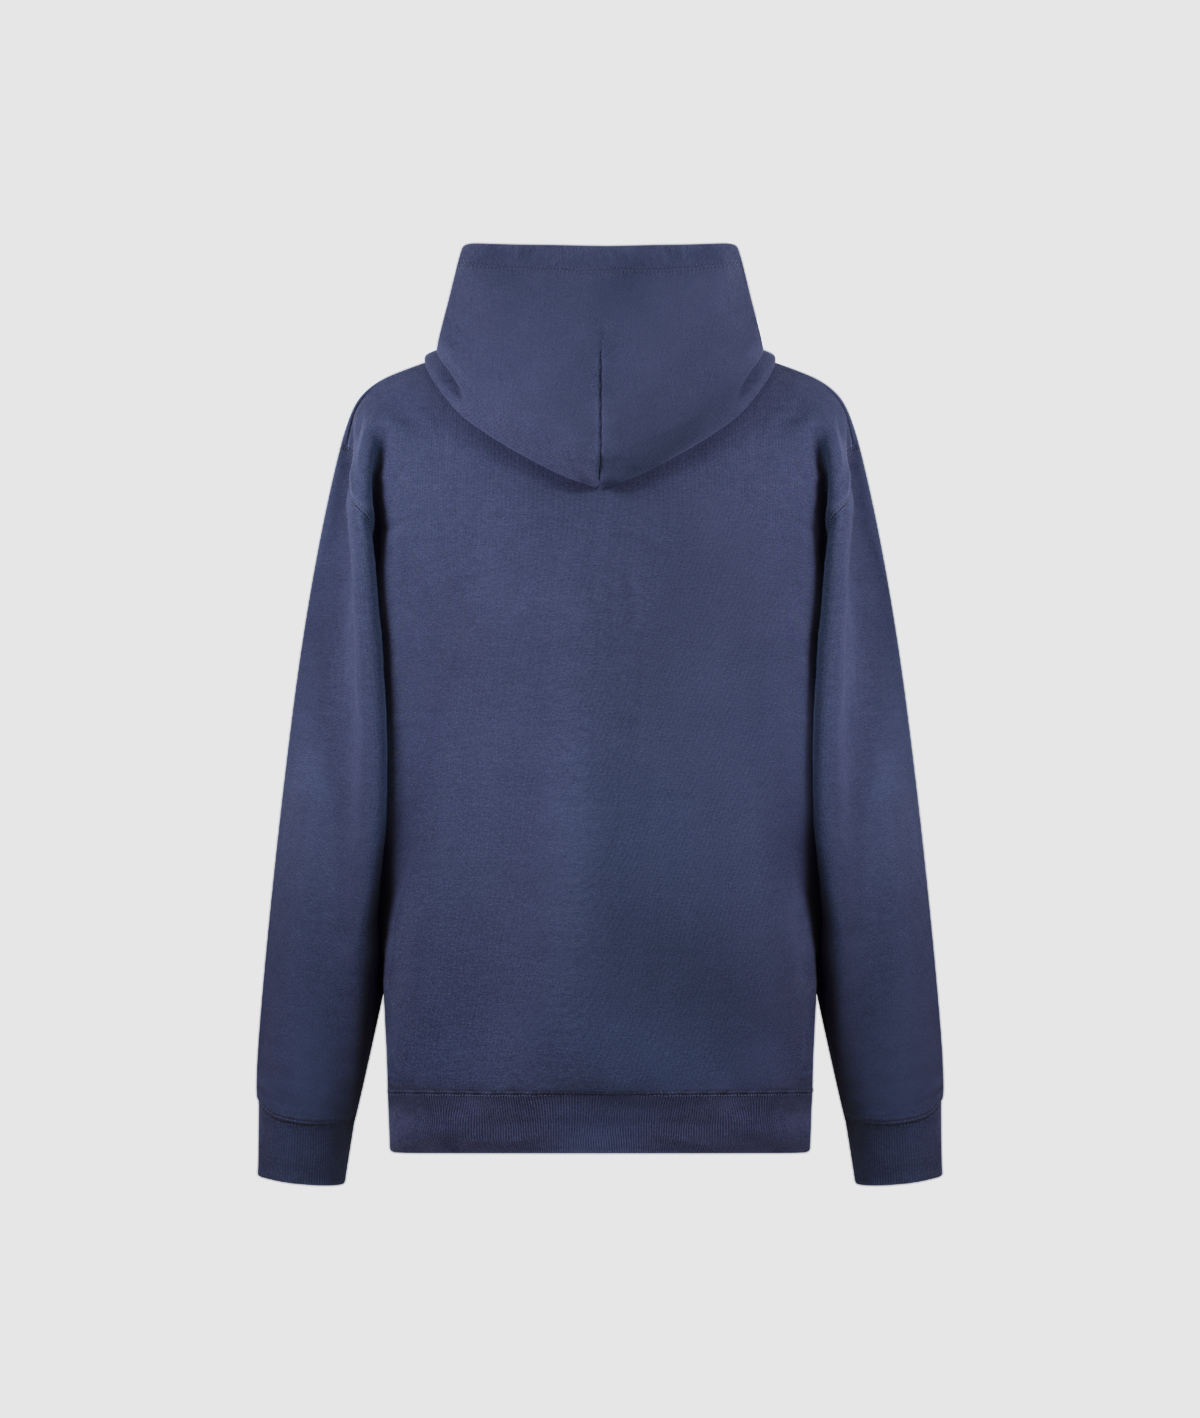 Spencer IEBS Hoodie. french navy colour back